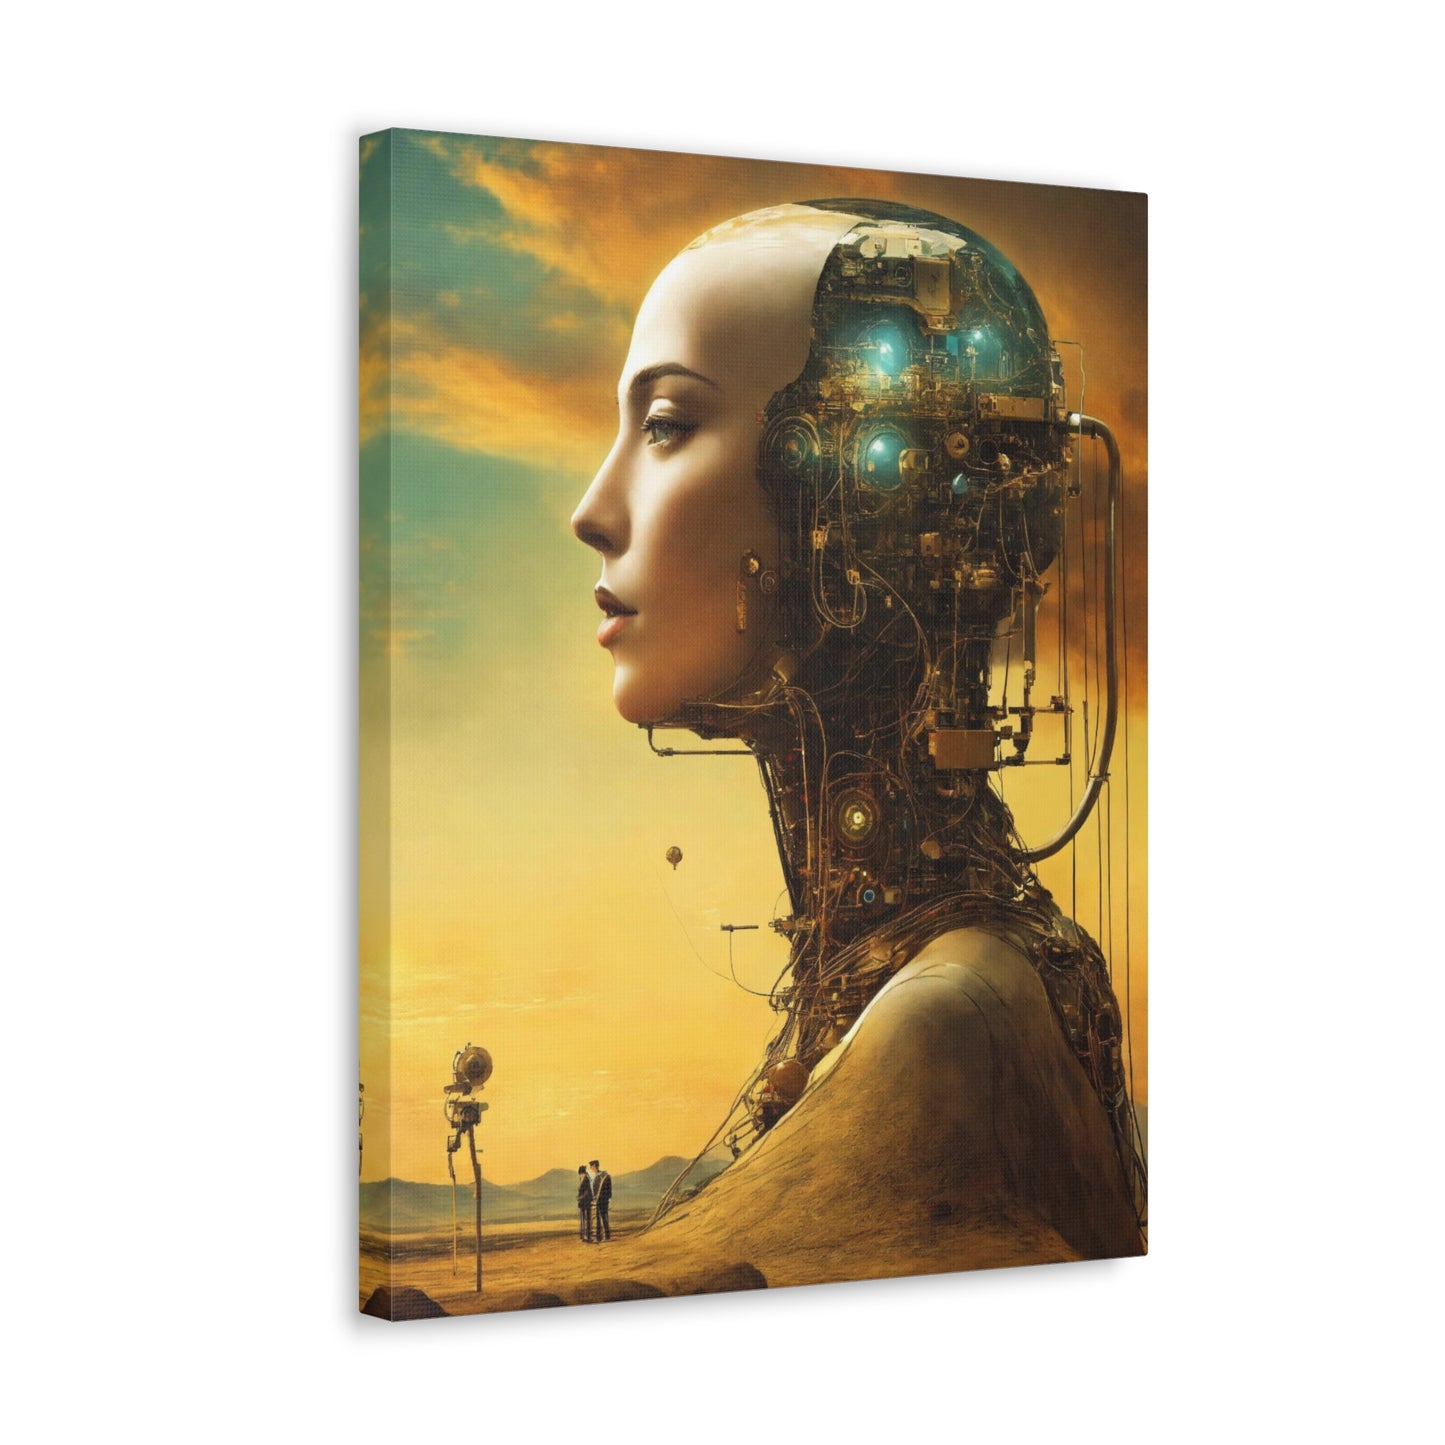 "Synthetic Sphinx: A Surreal Portrait of AI Ascension"